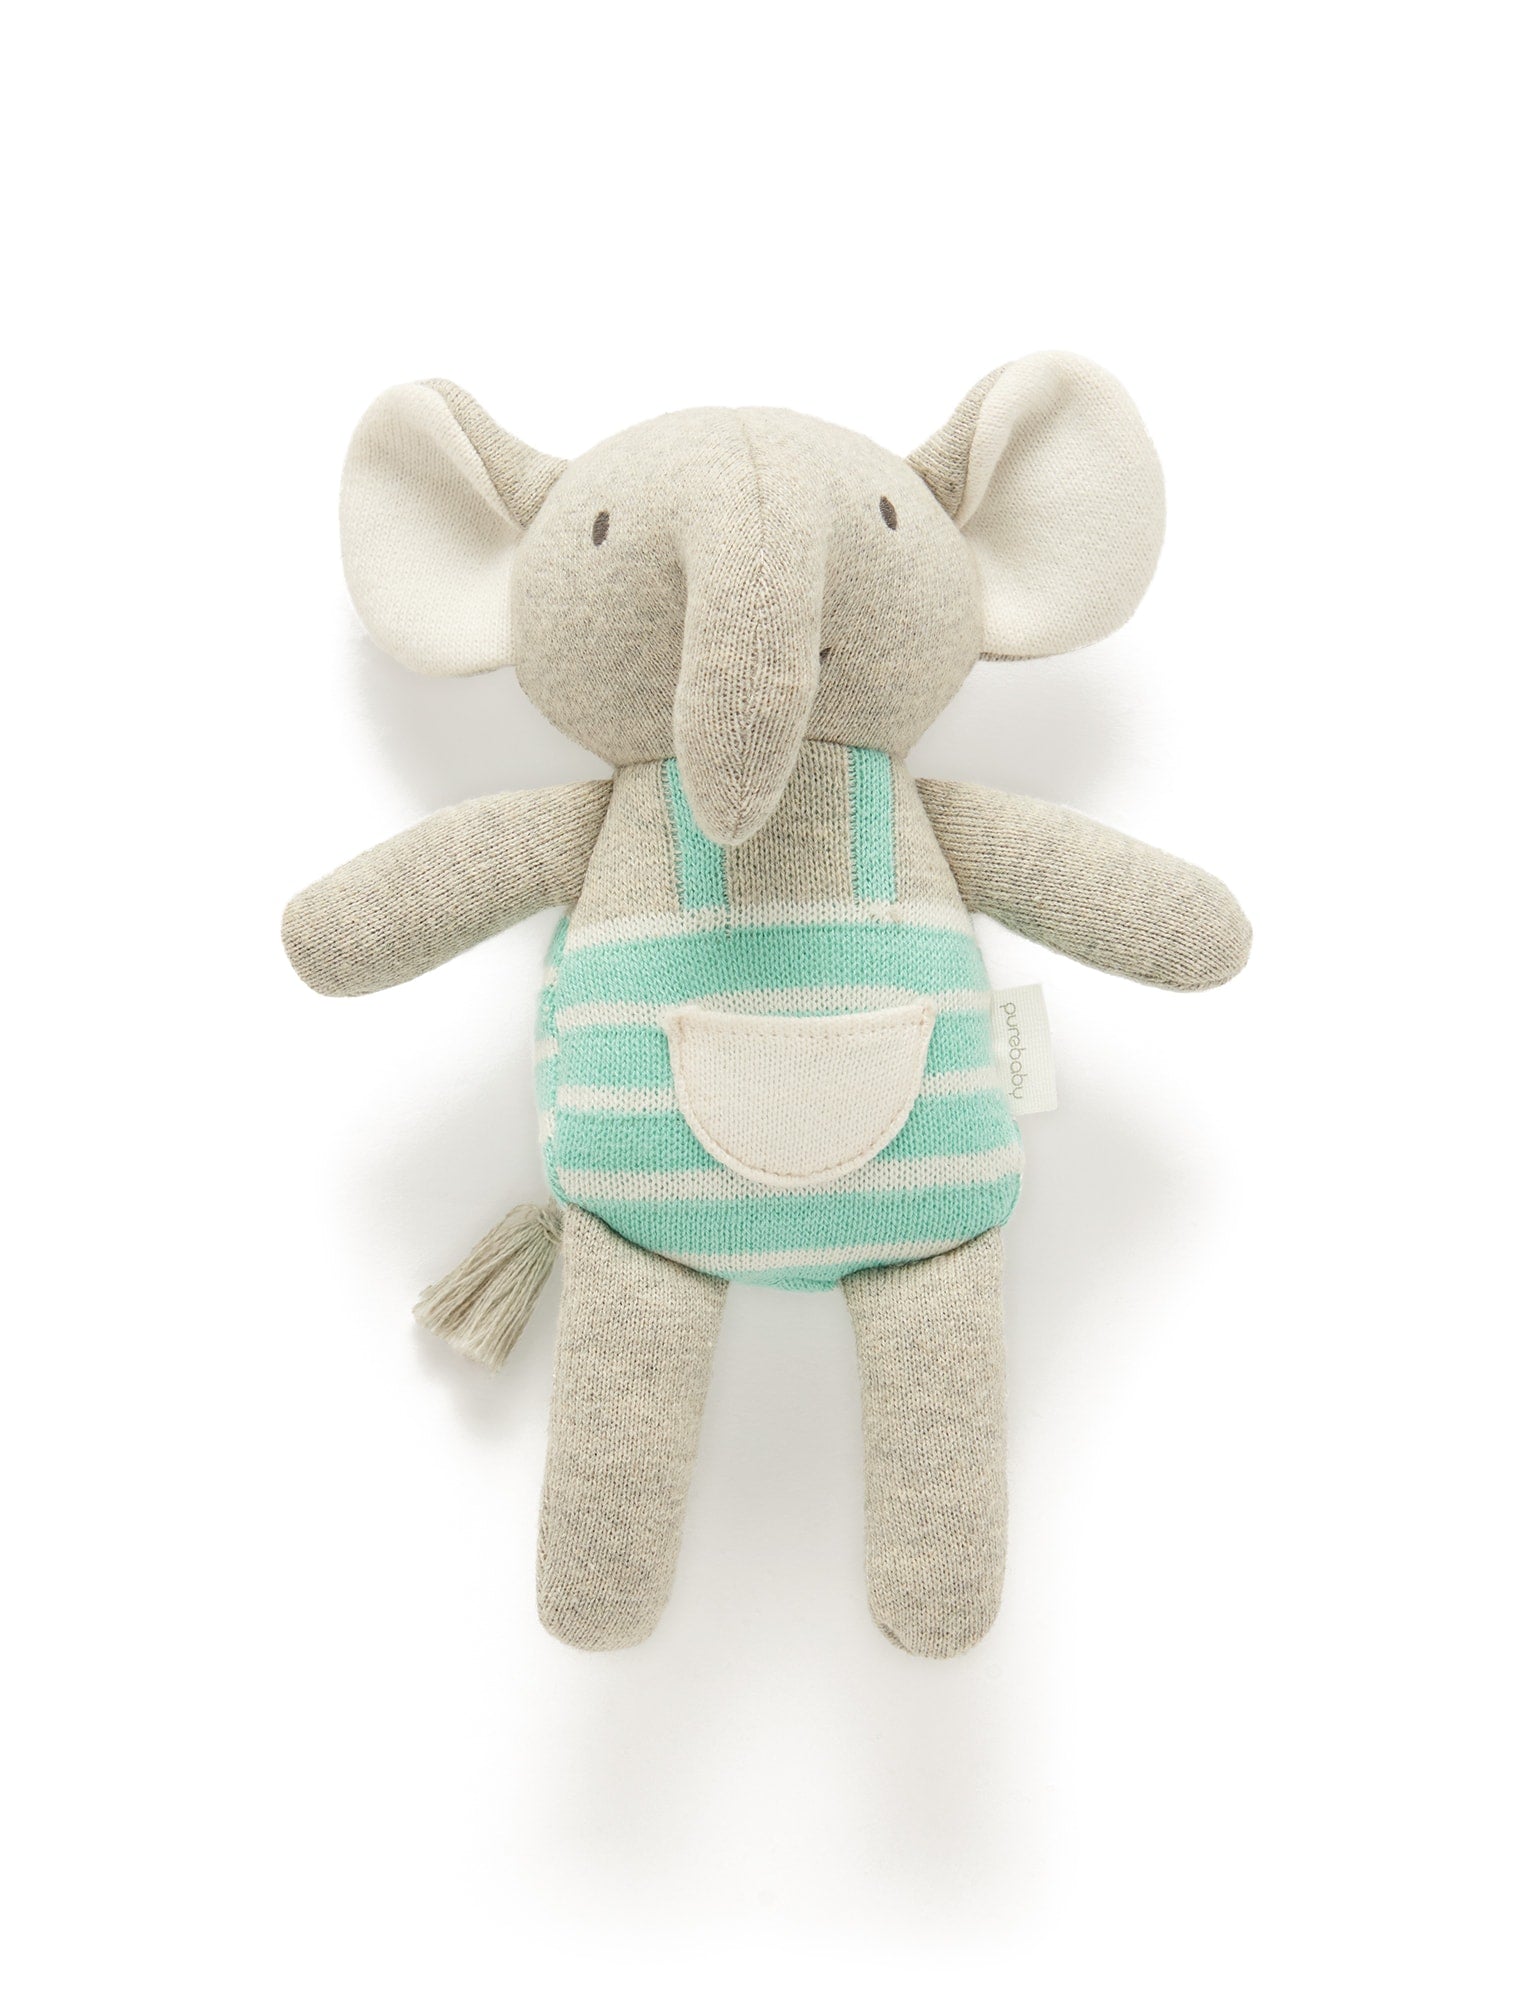 Soft Toys - Plush Toys for Babies & Kids - Purebaby - Purebaby